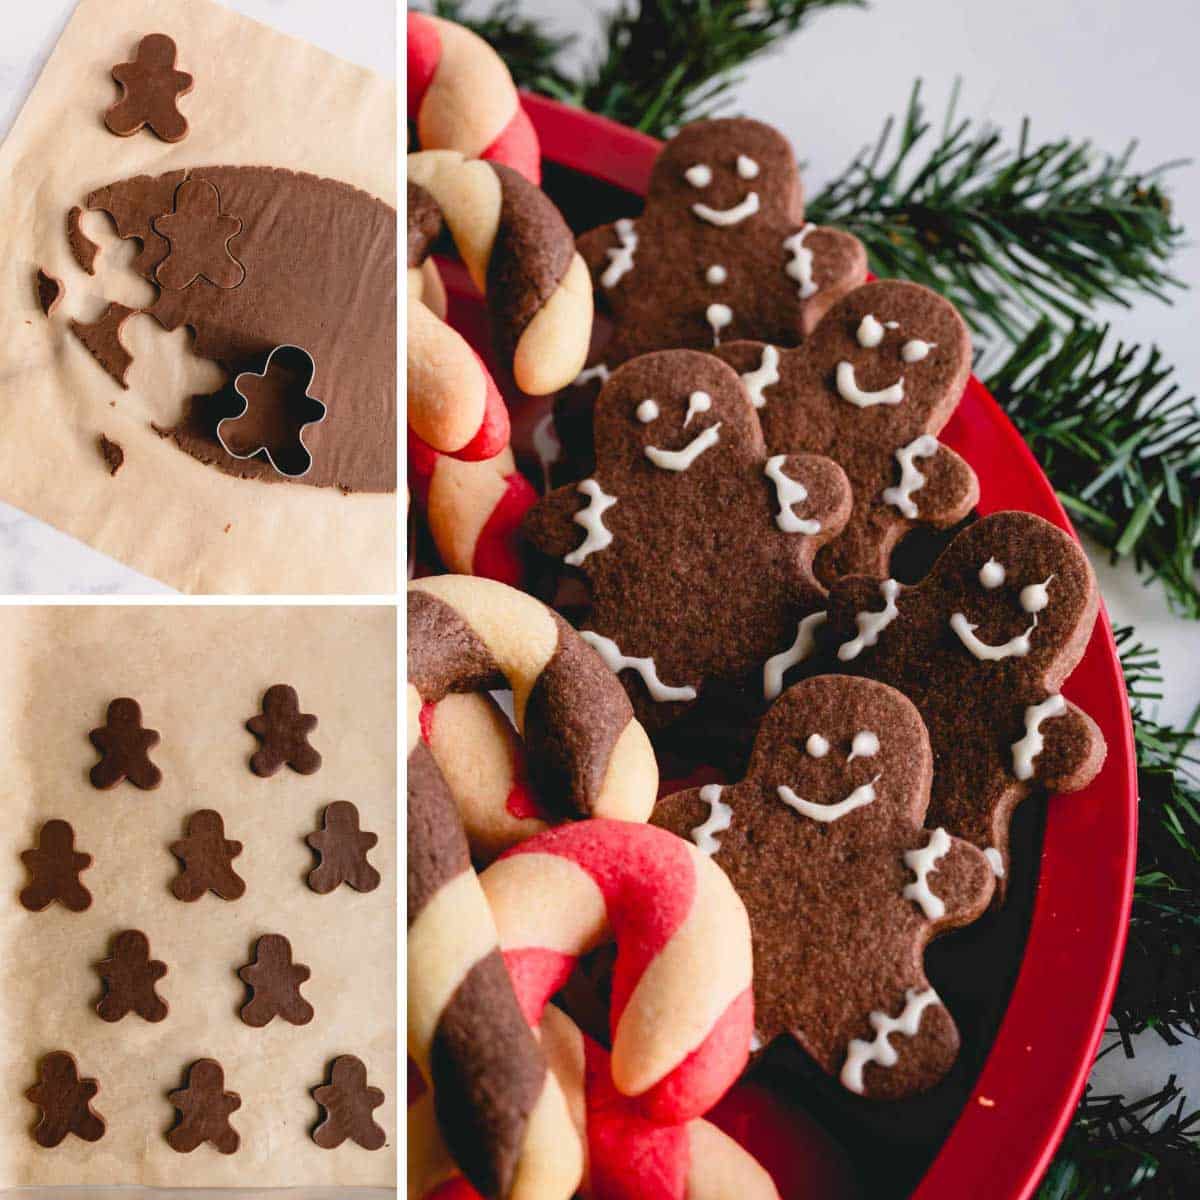 Step by step photos of making chocolate cutout cookies in gingerbread shape.